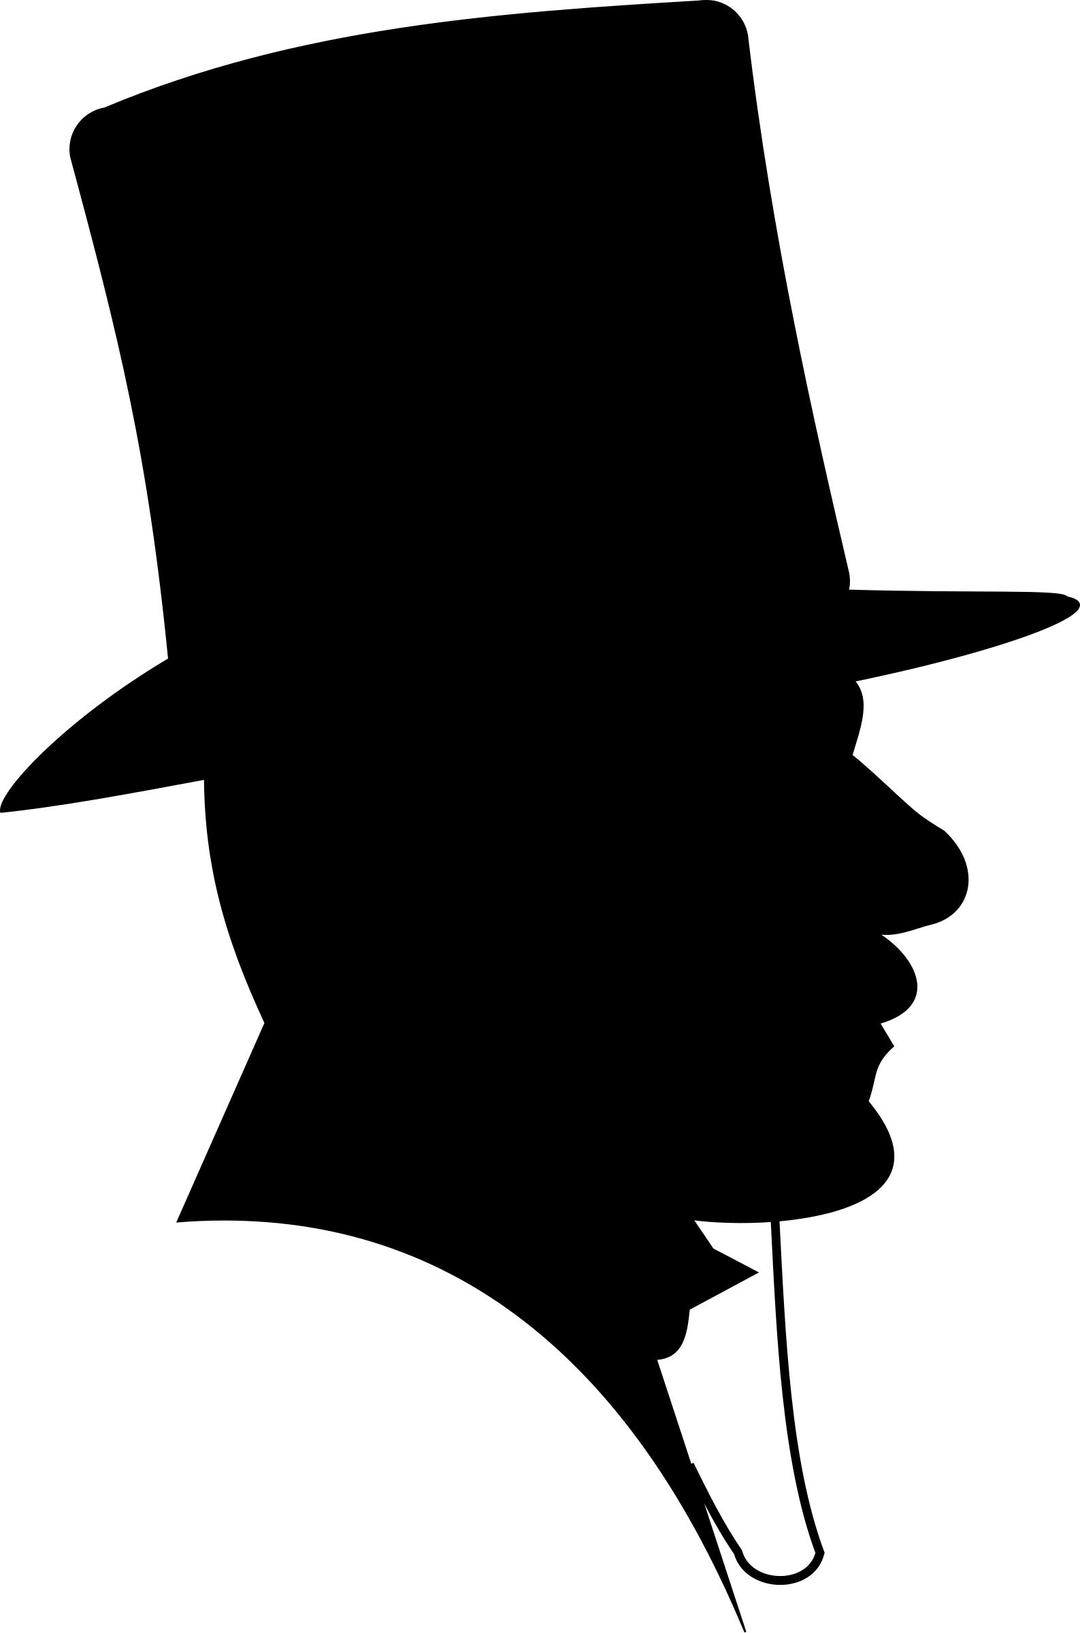 Victorian Man in Top Hat Silhoette Profile png transparent